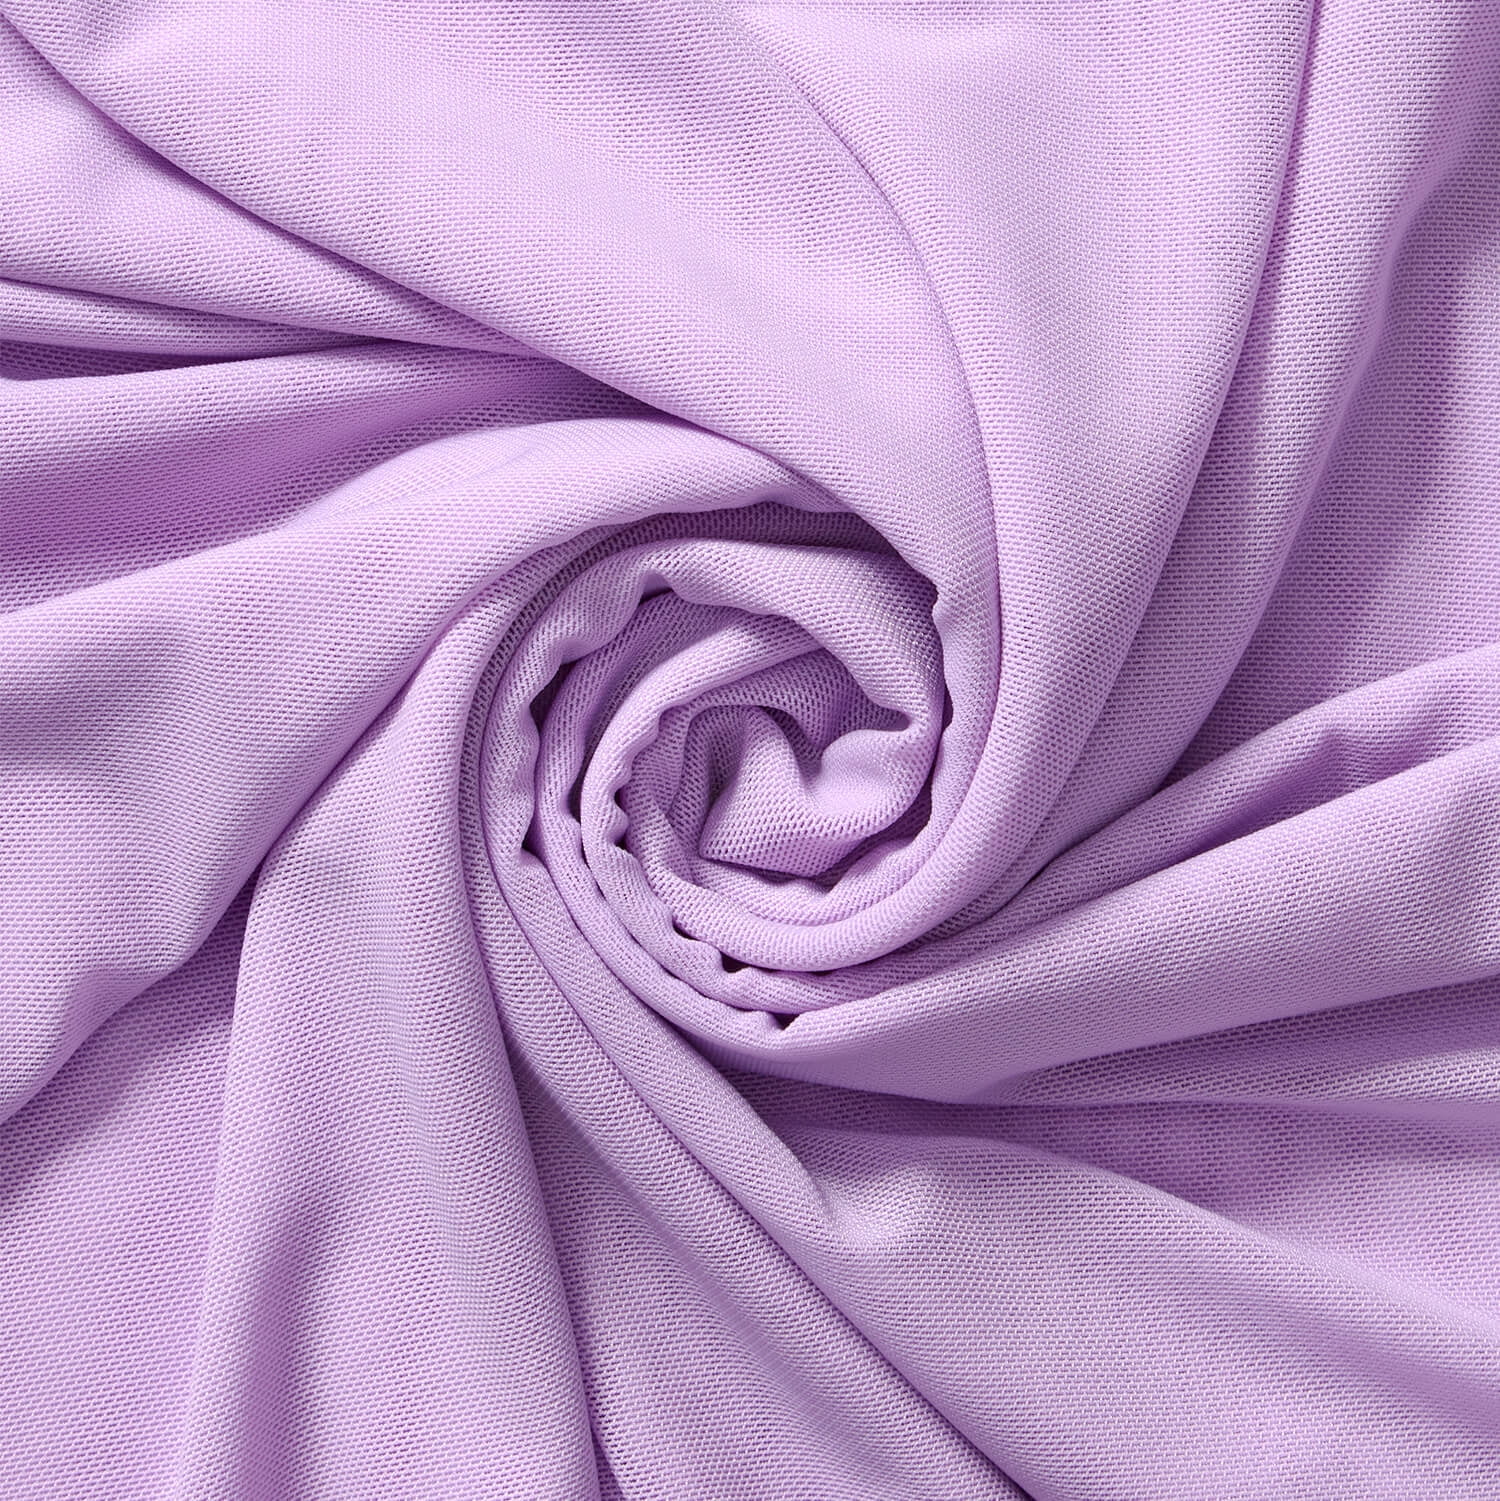 Solid Plum Purple, Quilting Fabric, 100% Cotton, 44 Wide